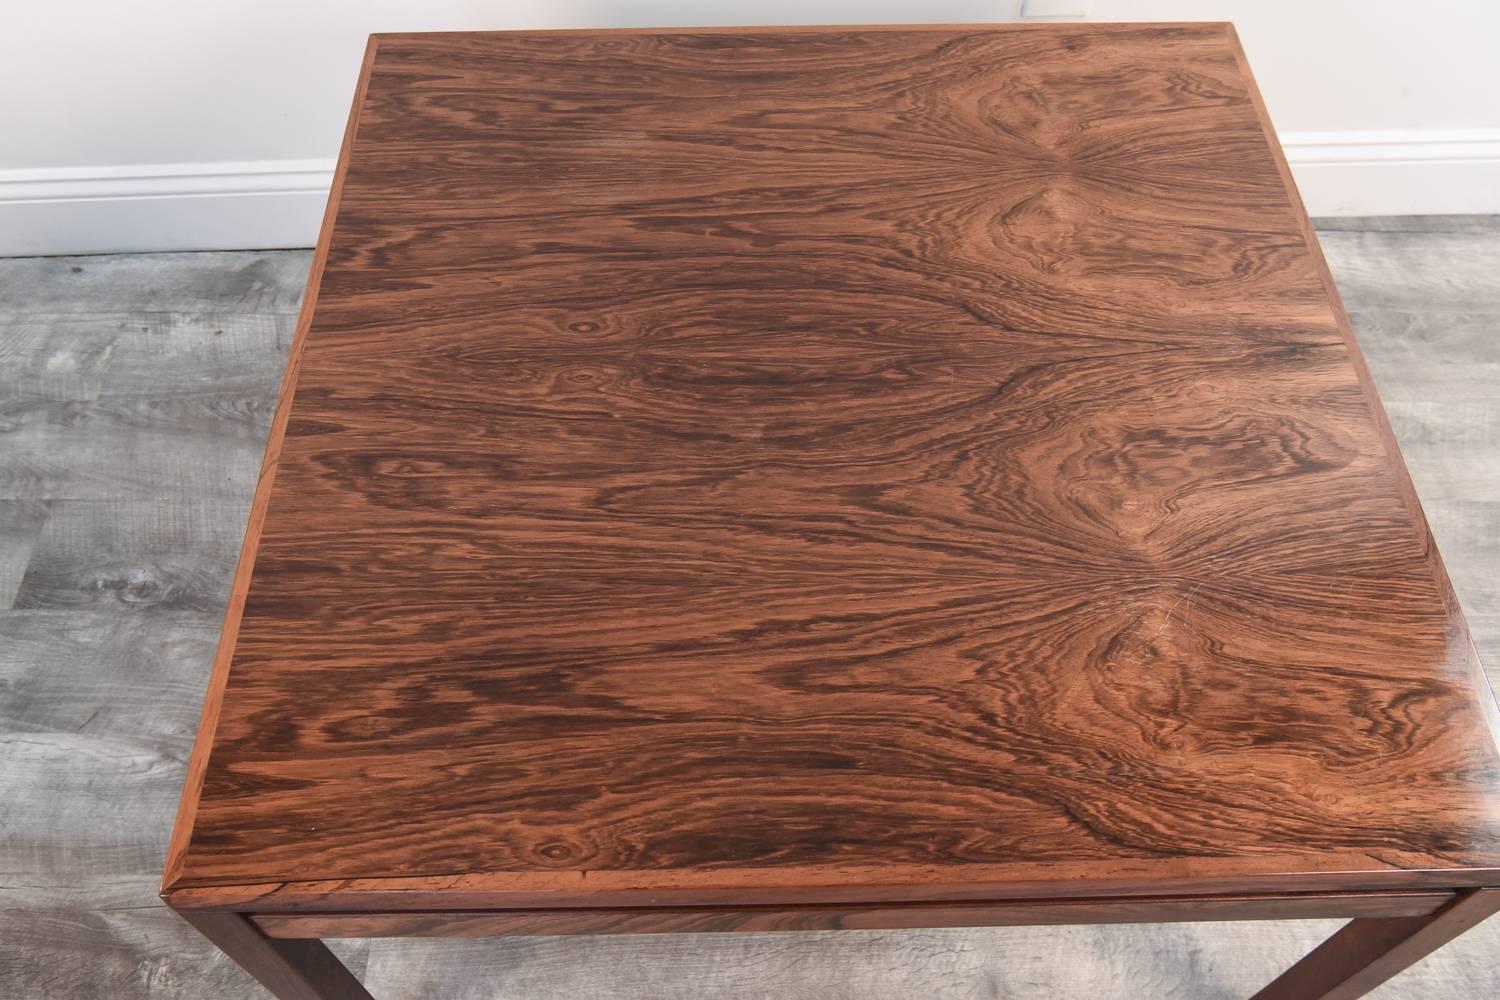 This midcentury Danish coffee table is made of stunning rosewood, with beautiful color and grain. In a Classic form, this table would make a wonderful addition to any room.